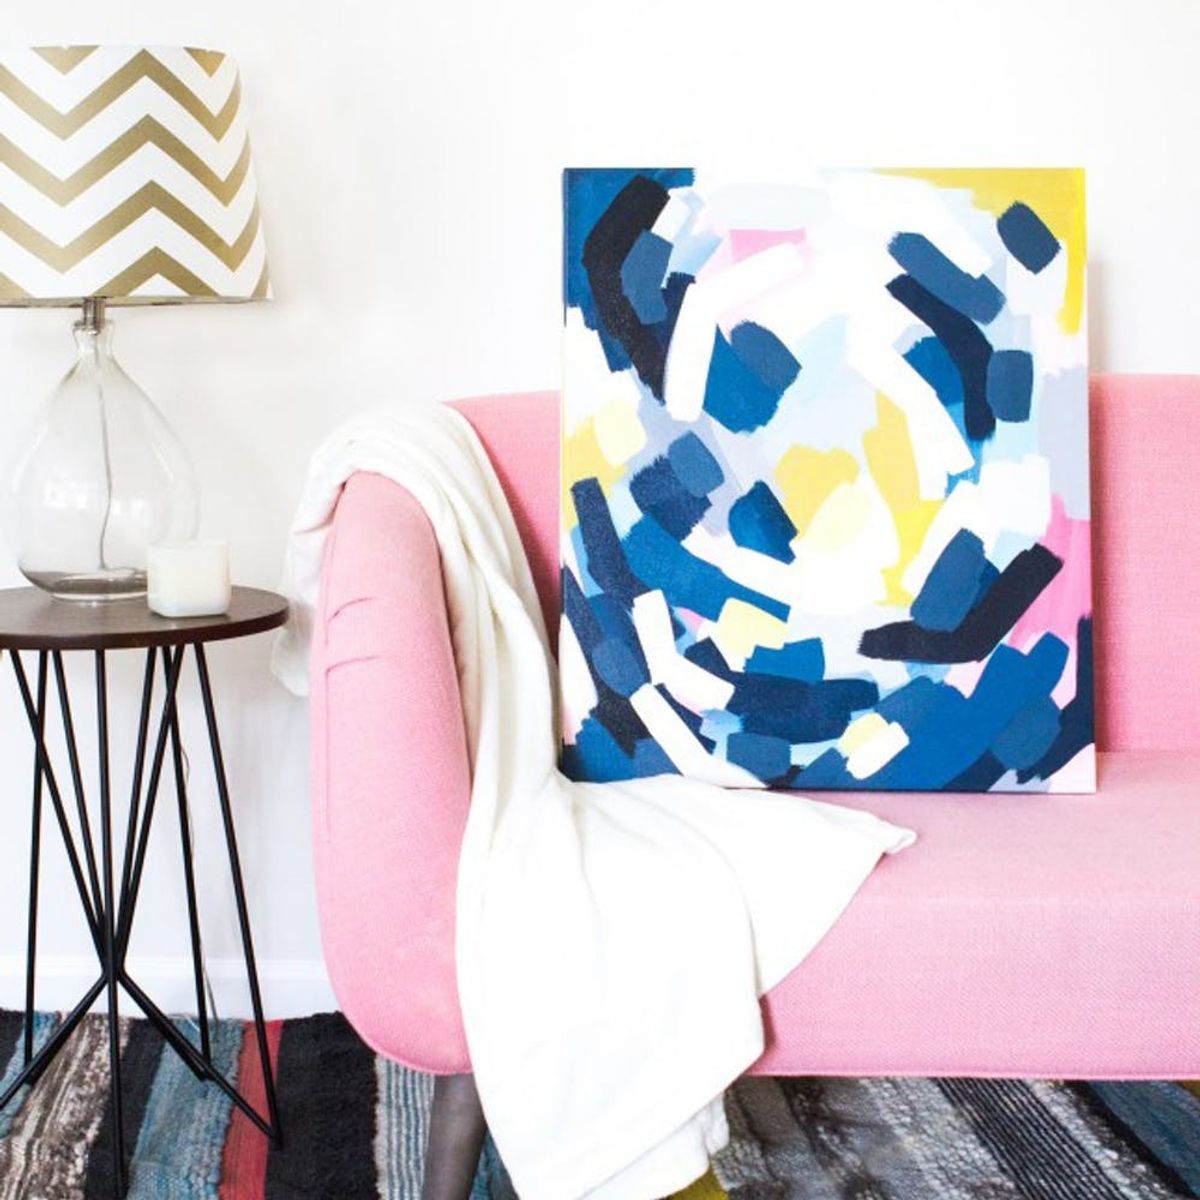 14 Home Decor Splurges That Are Way Cheaper to DIY vs Buy